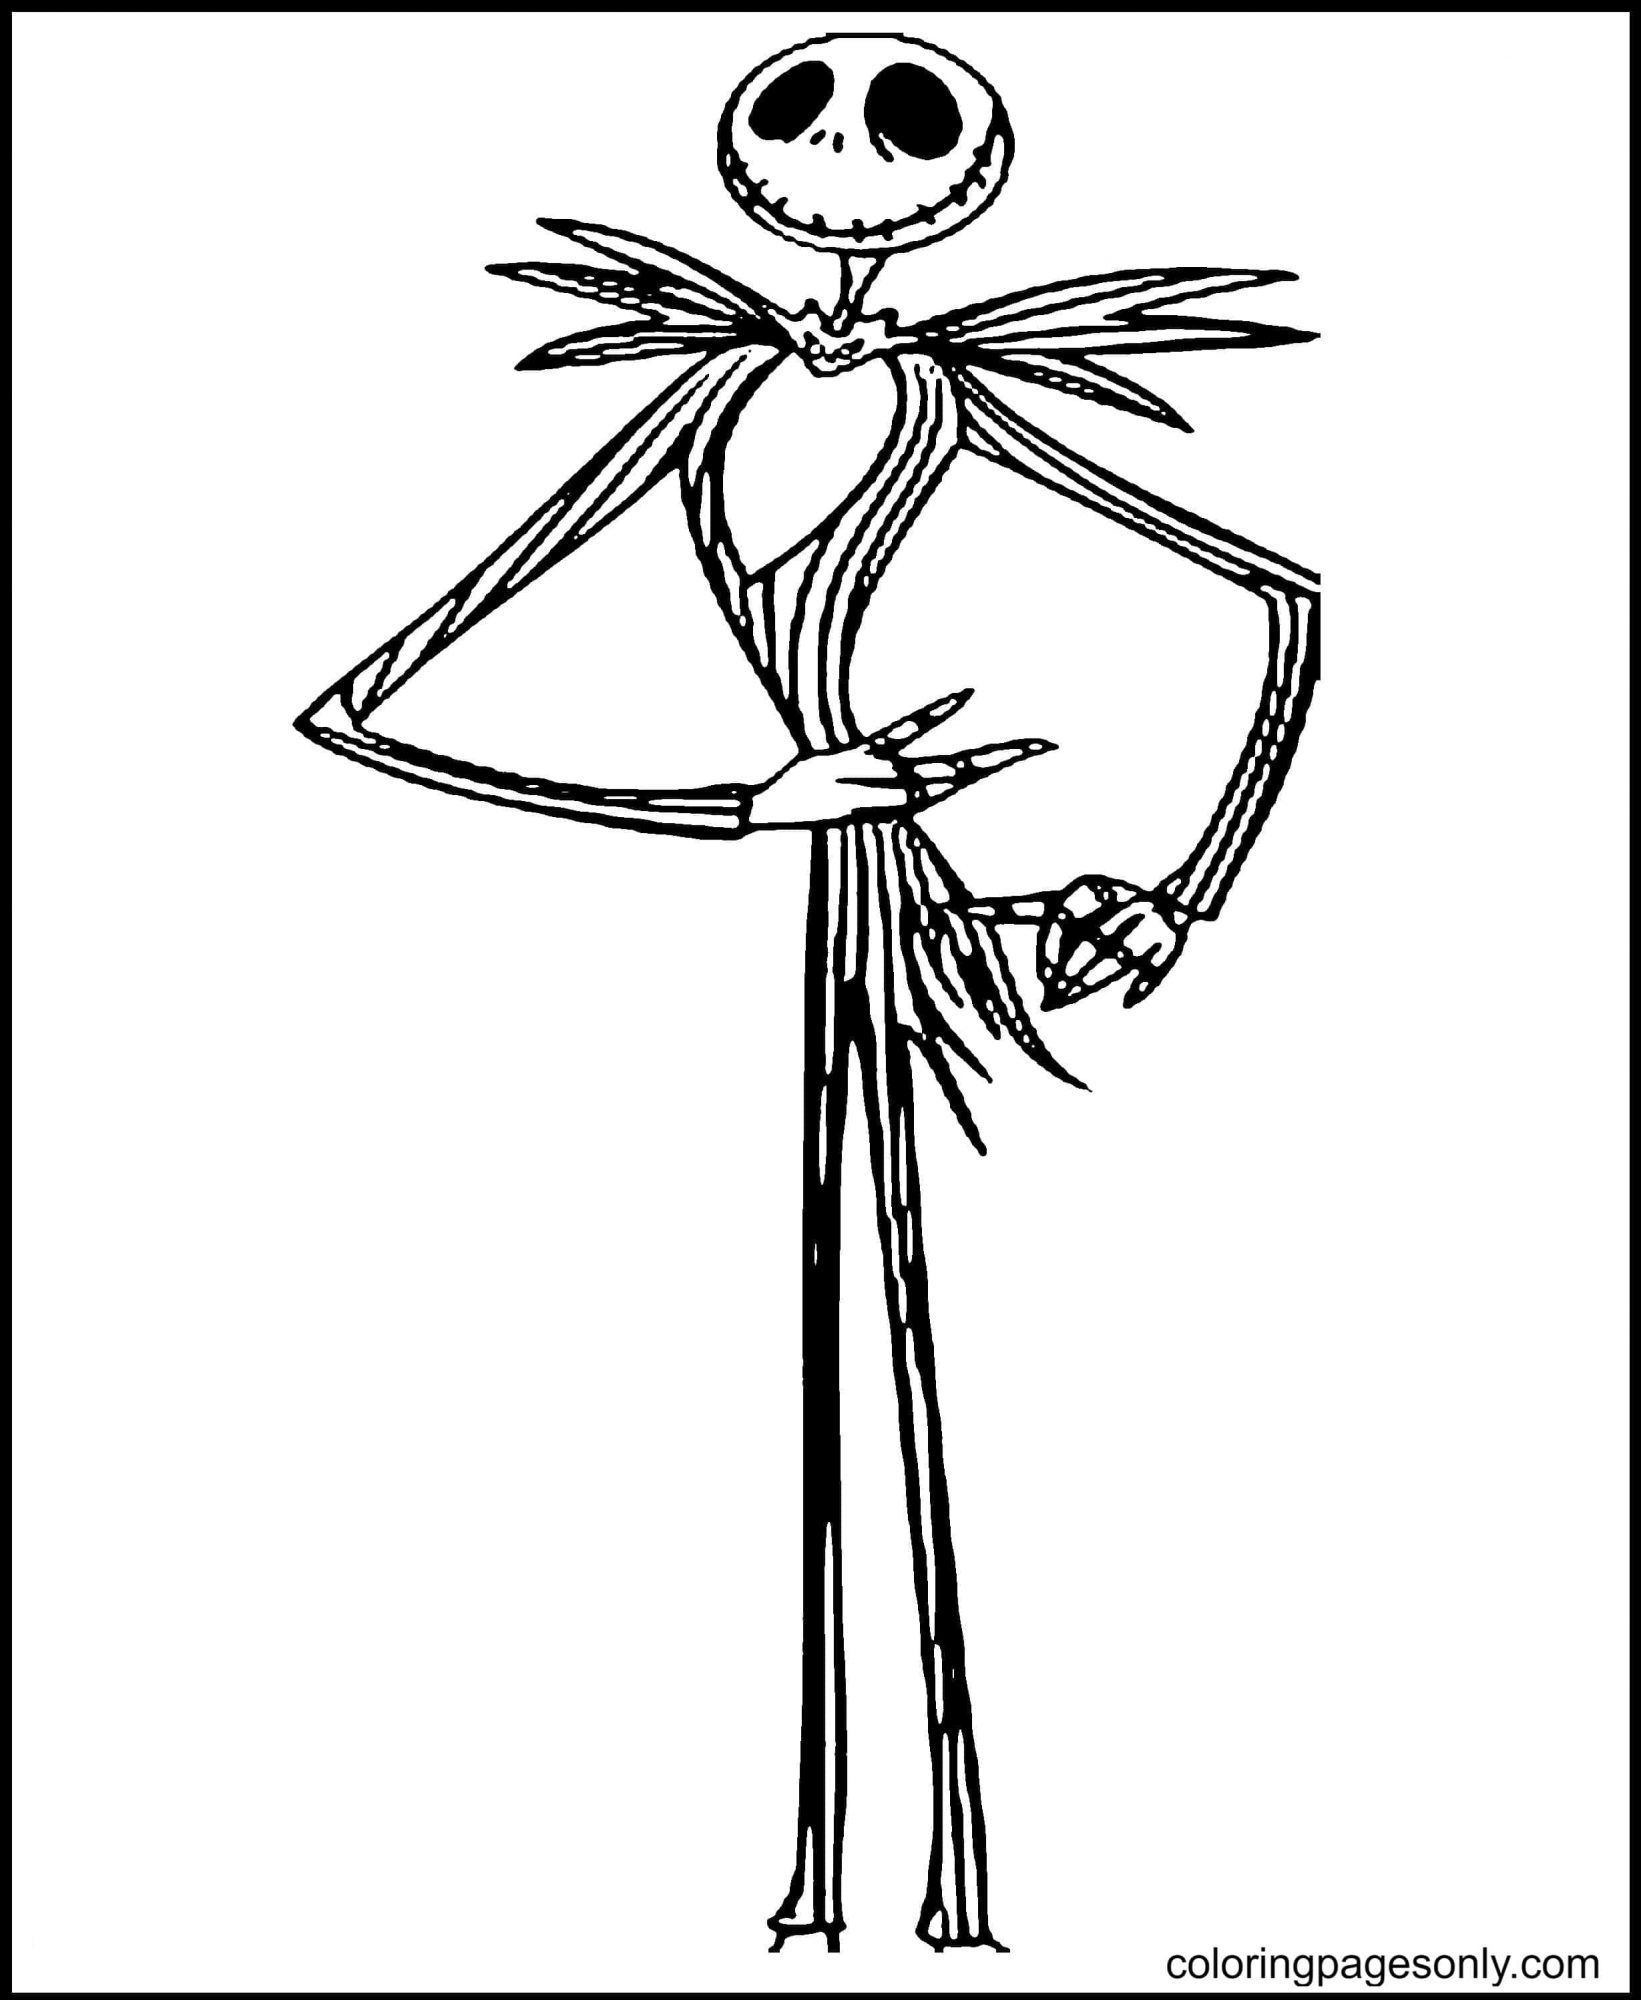 Jack From Nightmare Before Christmas Coloring Page